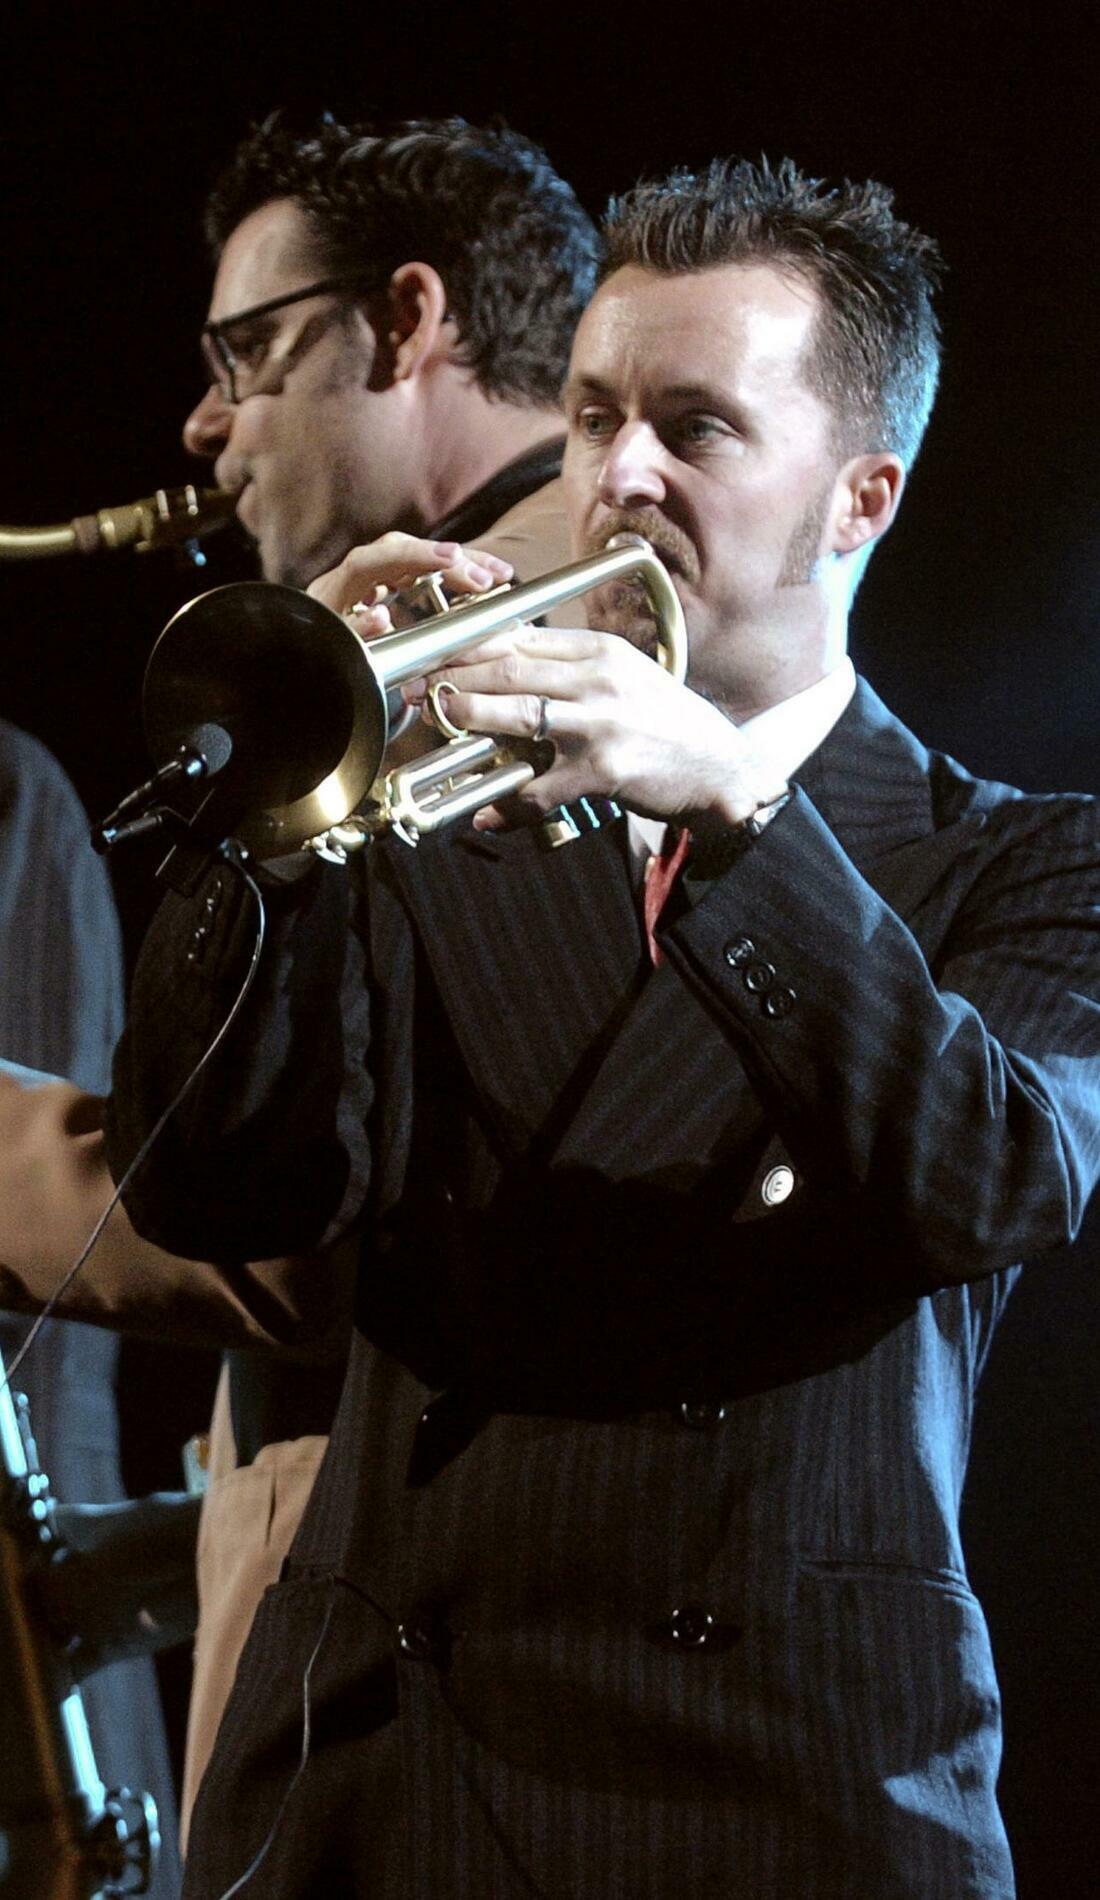 A Big Bad Voodoo Daddy live event